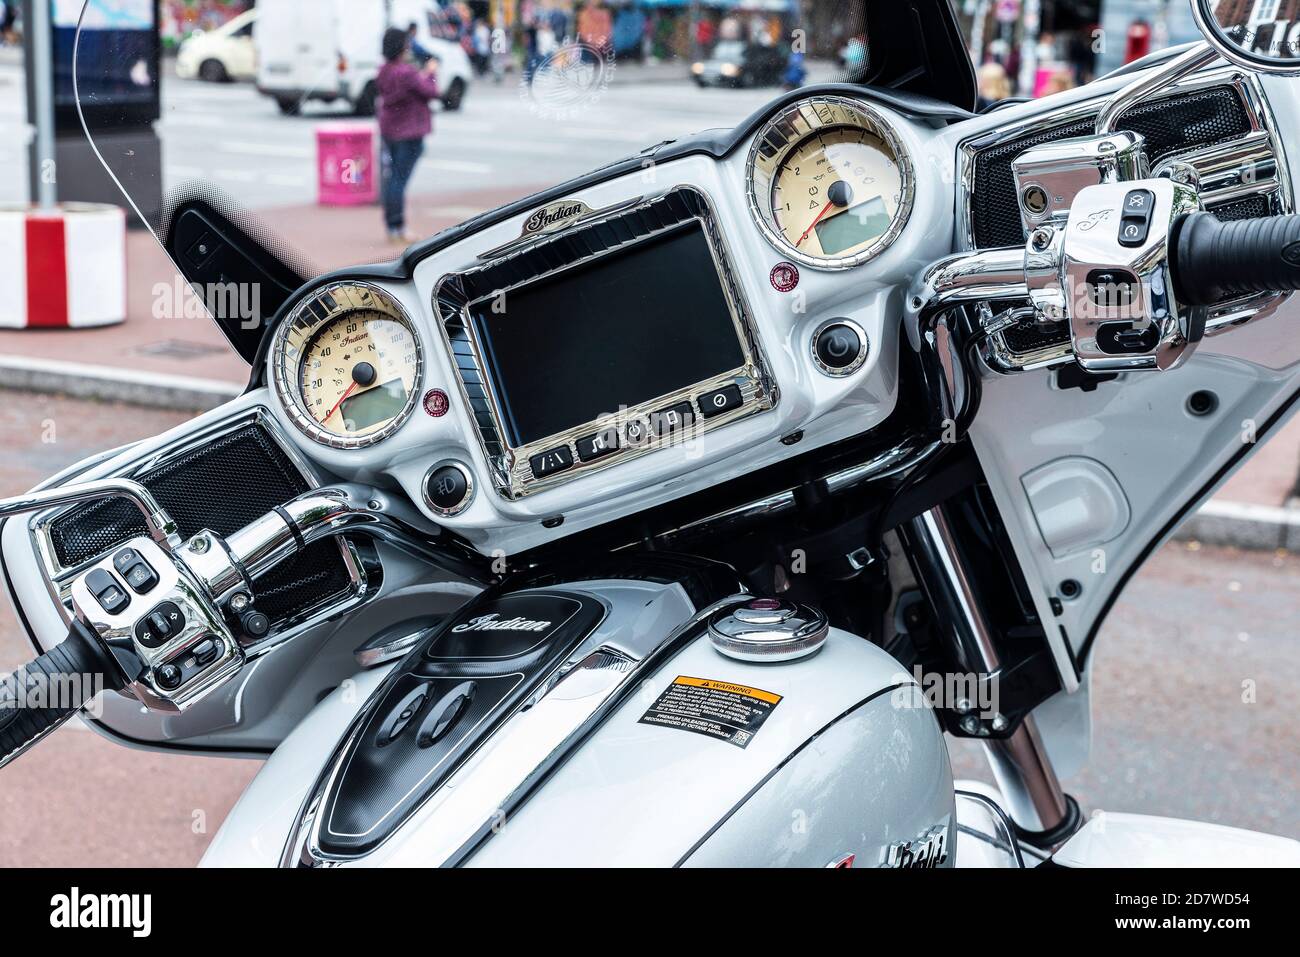 Hamburg, Germany - August 16, 2019: Dashboard and handlebar of the Indian Roadmaster motorcycle parked on a street in Hamburg, Germany Stock Photo